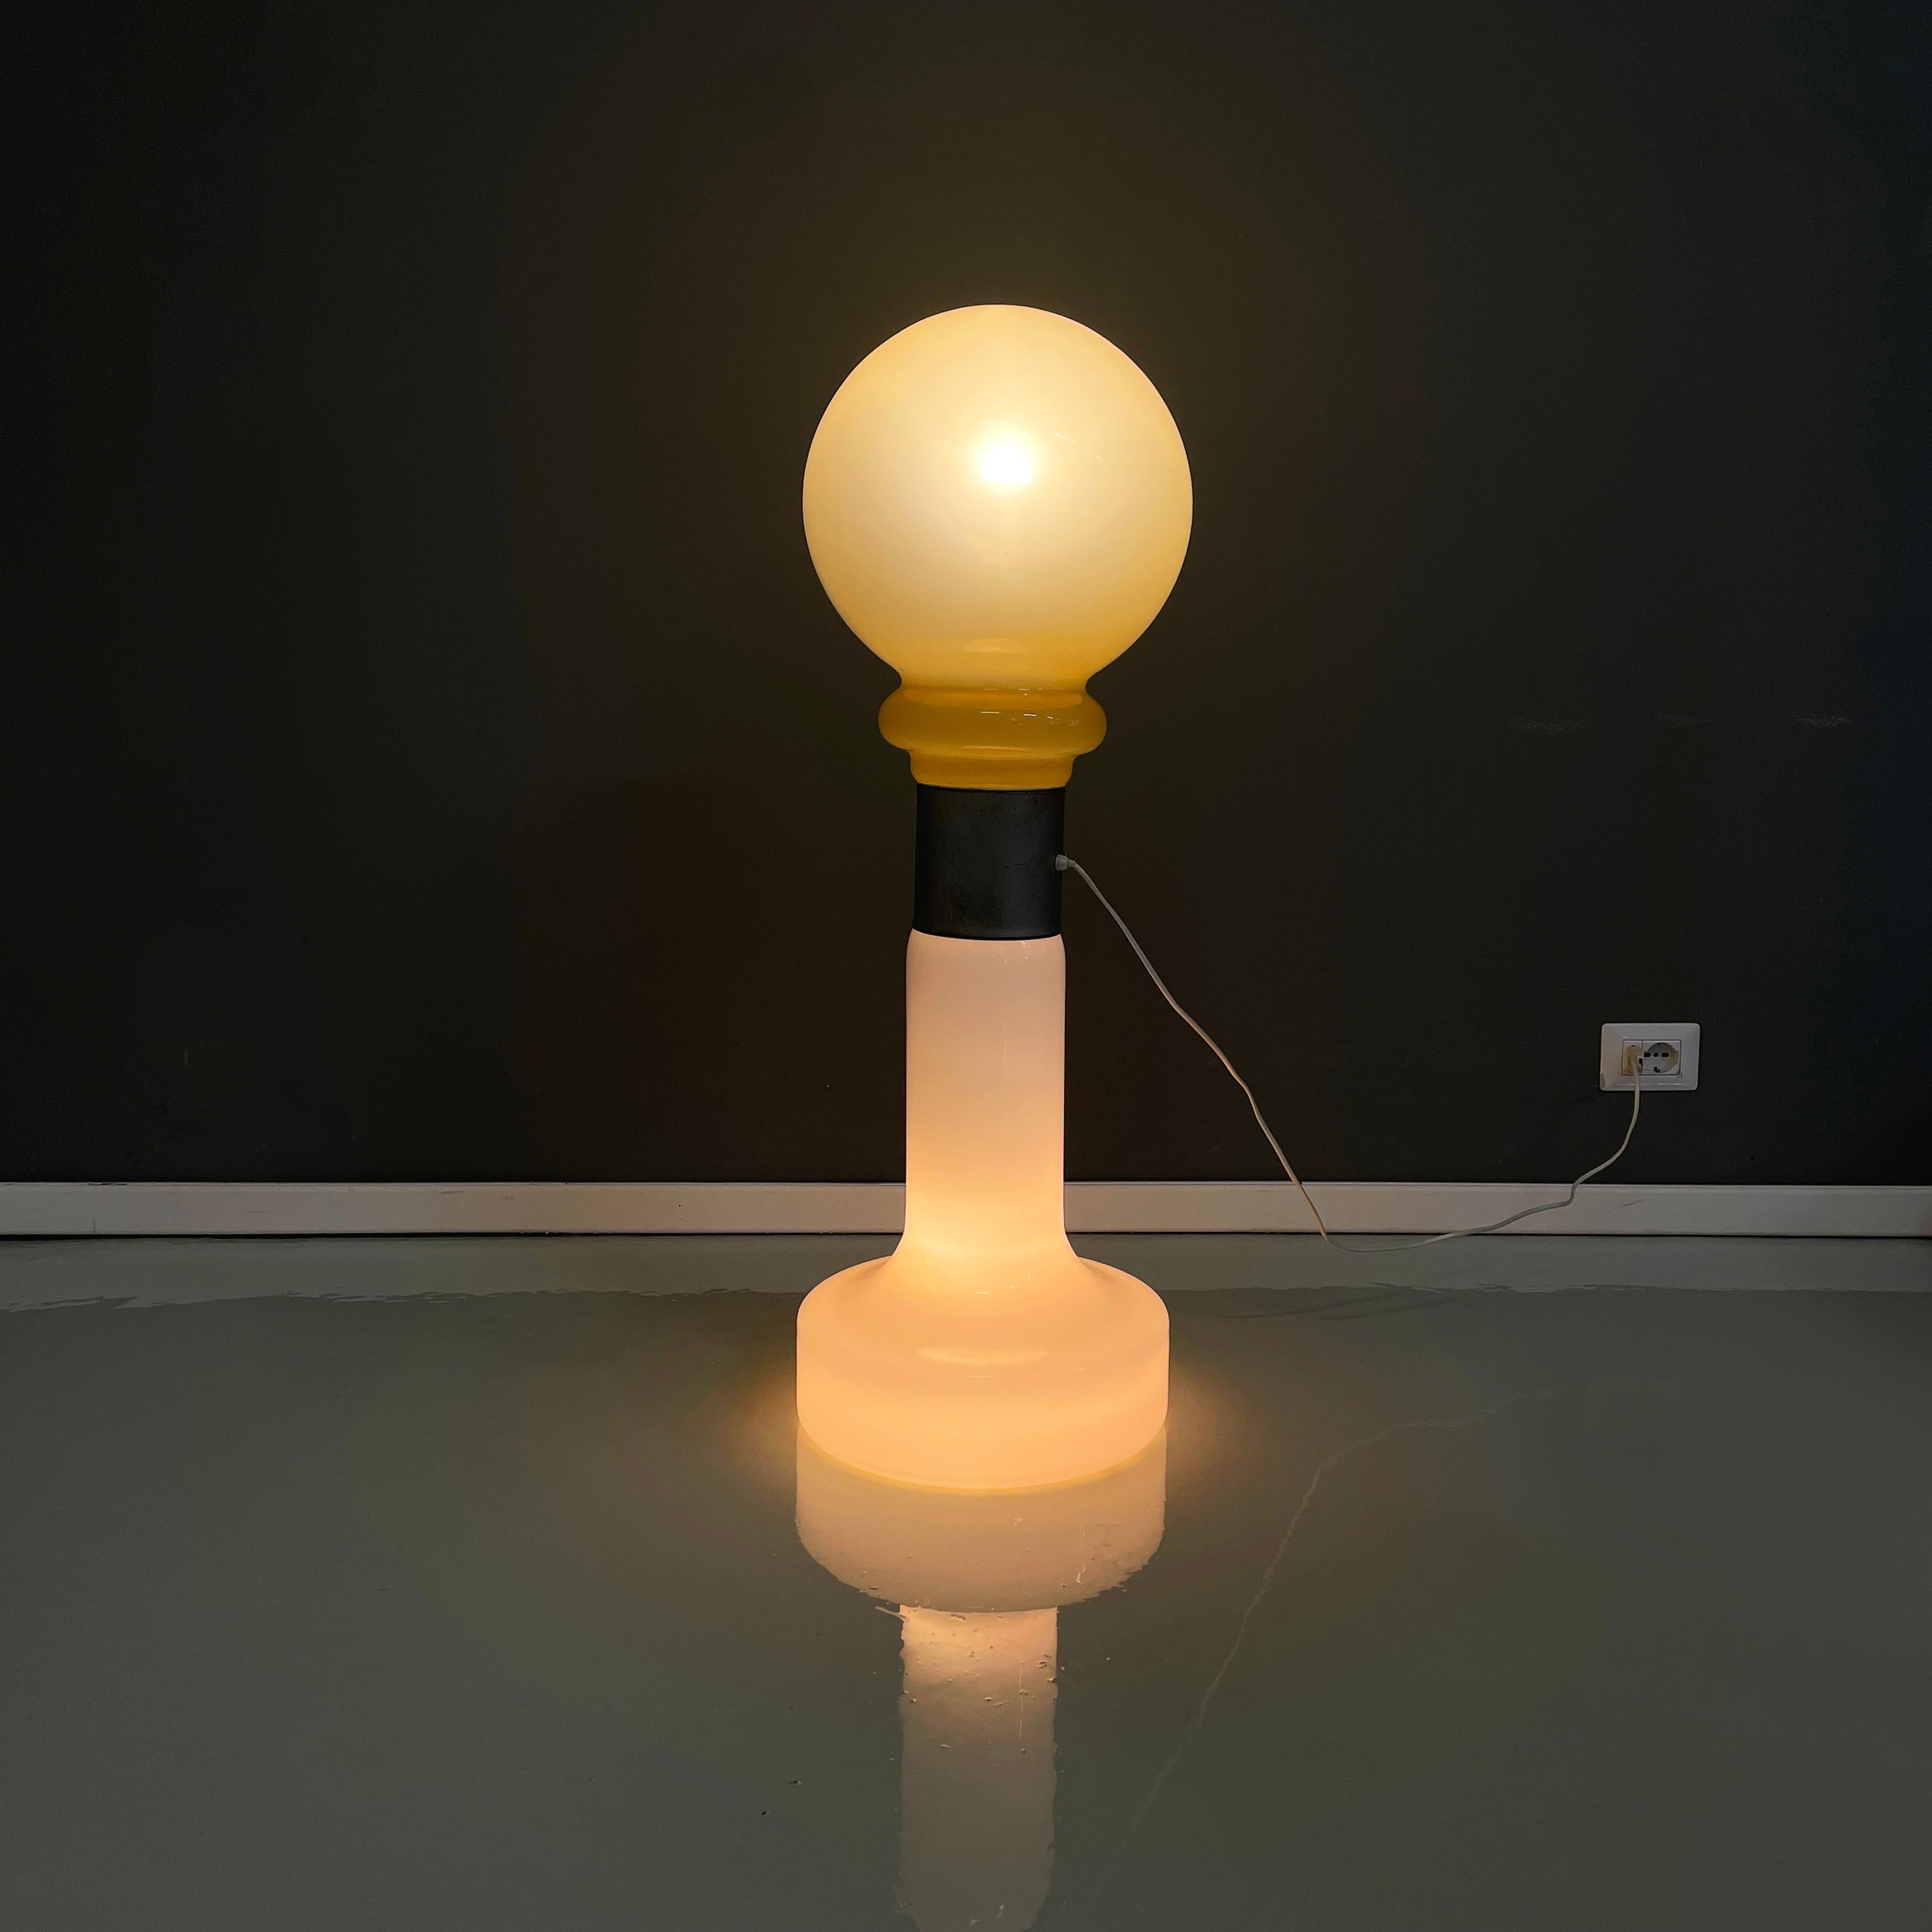 Italian space age Floor lamp in Murano glass metal by Carlo Nason for Mazzega, 1970s
Floor lamp with double Murano glass diffuser. The upper part diffuser is spherical and made of yellow glass. The diffuser in the lower part has a round base made of